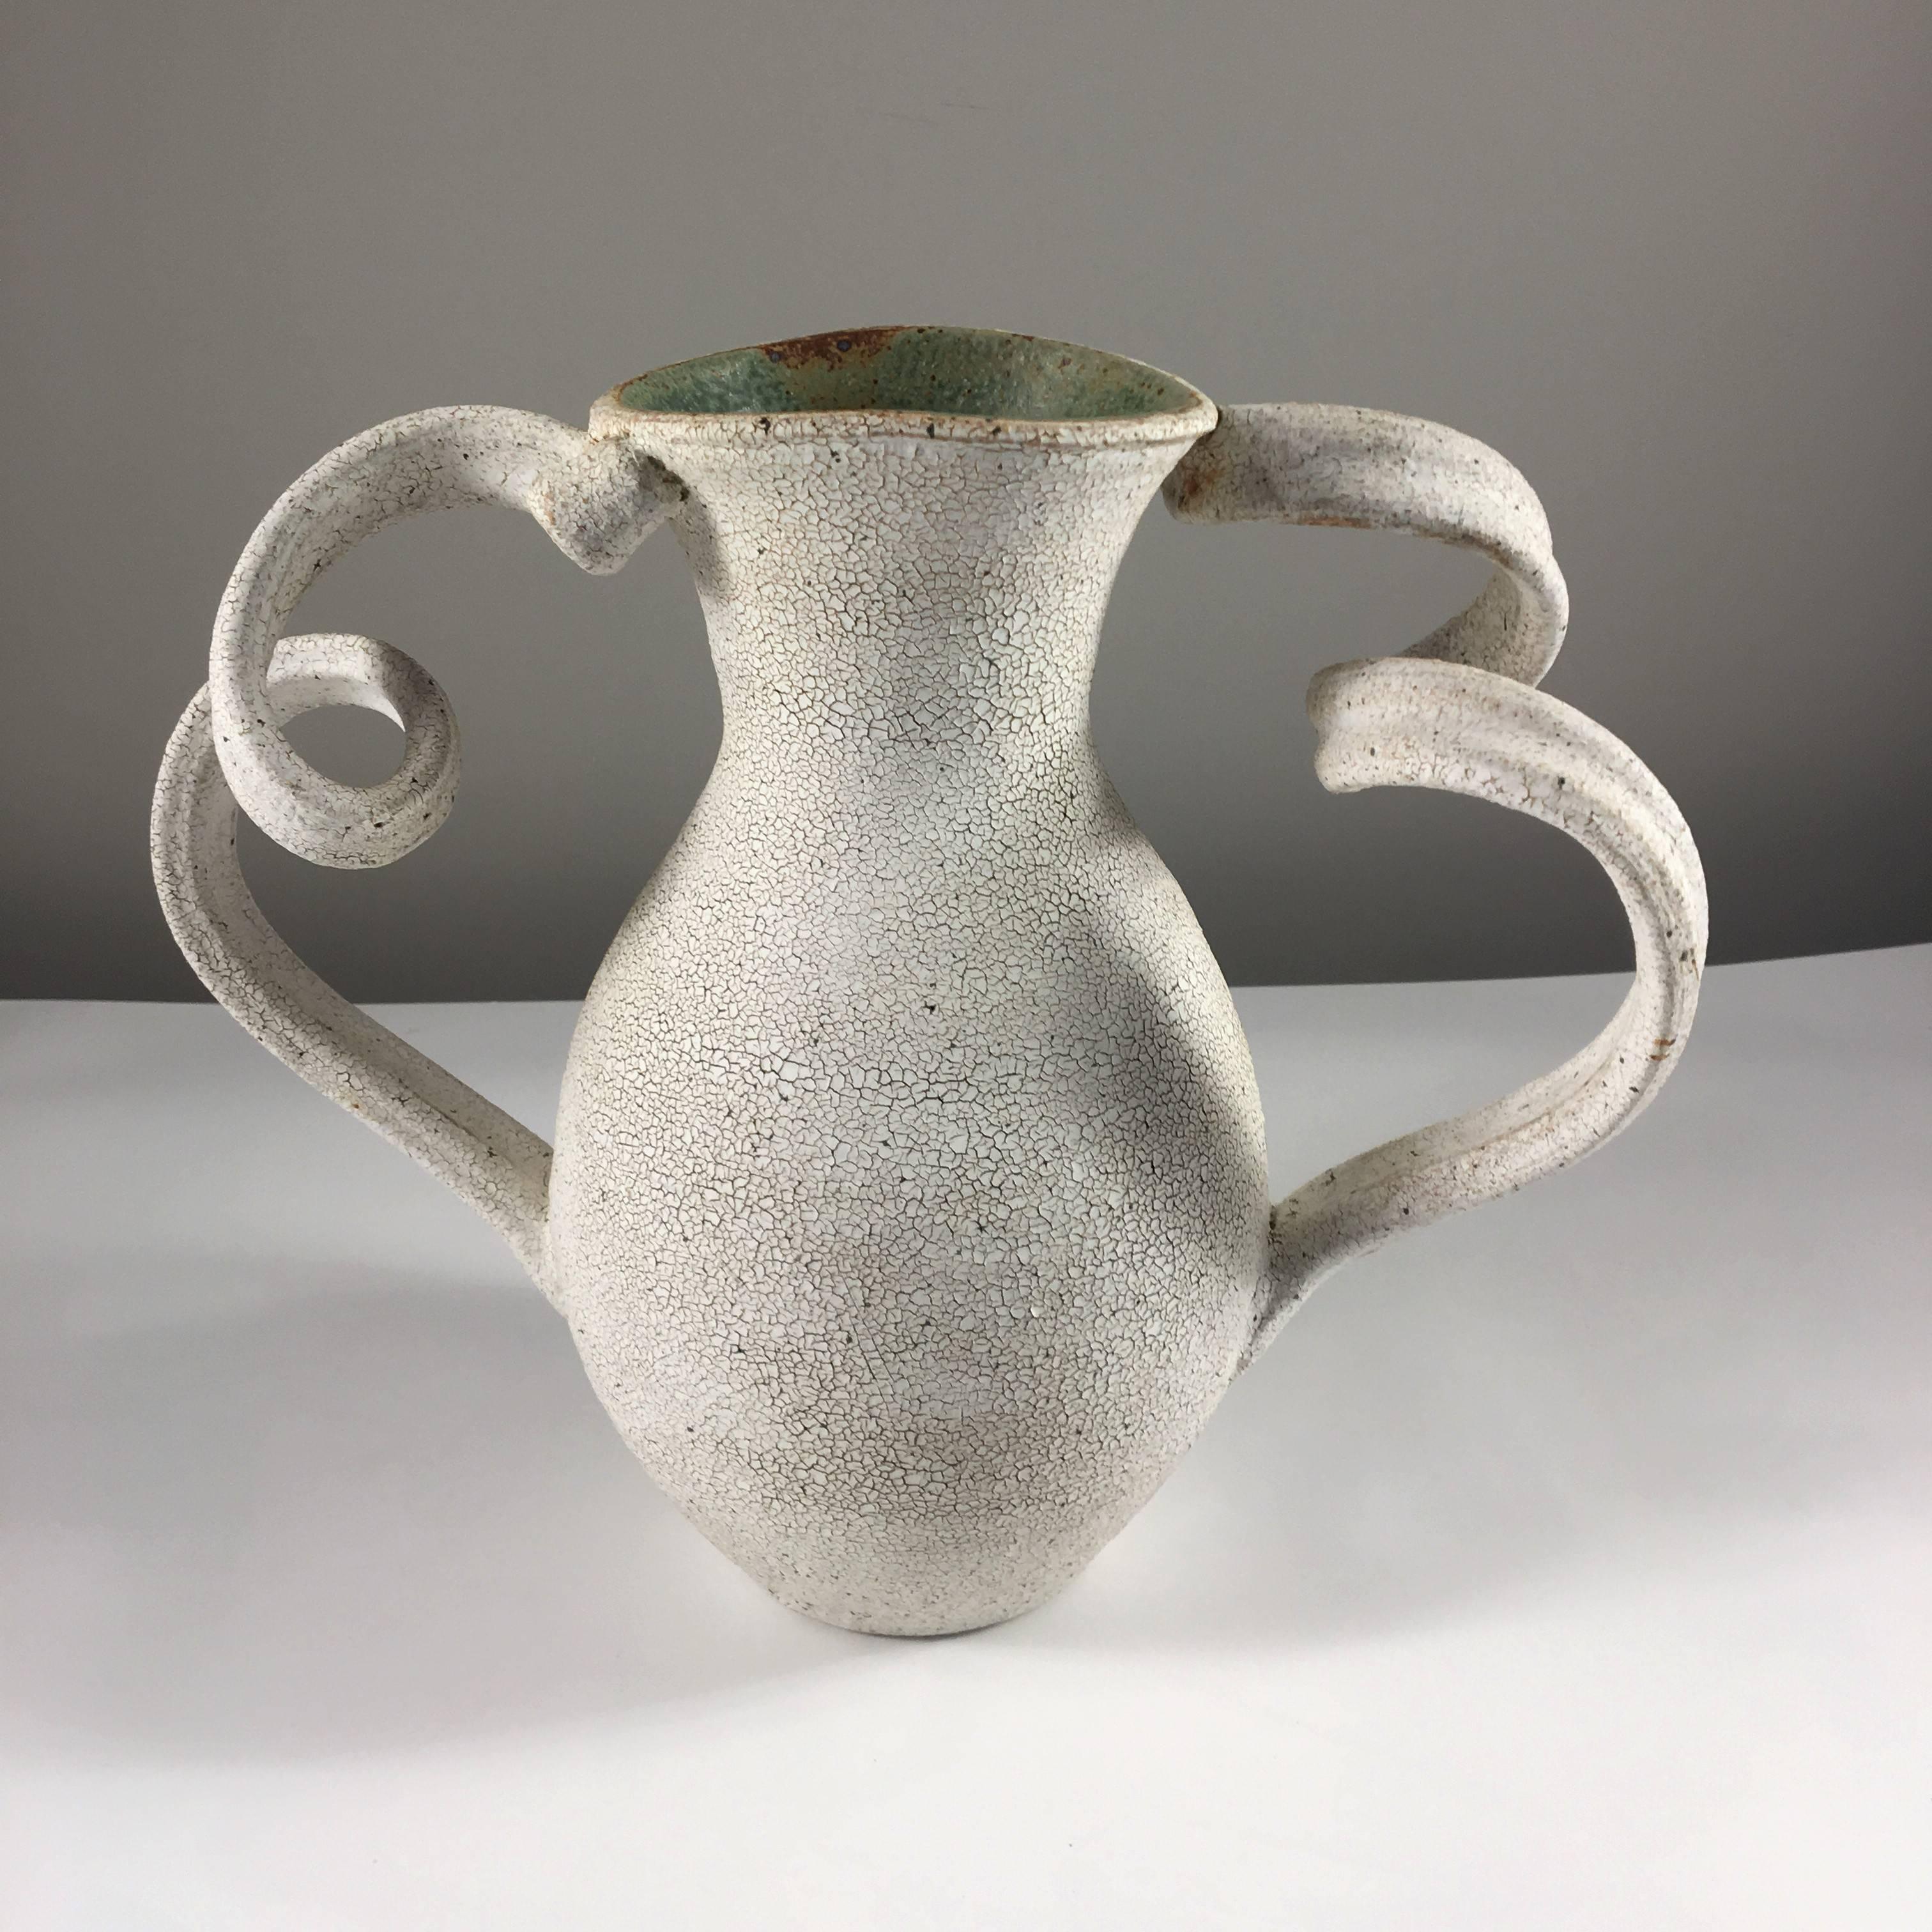 Contemporary ceramic artist Yumiko Kuga's glazed stoneware amphora vase no. 151 is part of her Crackle Series. All of the pieces in this series are hand-built and 100% handmade so they are one-of-a-kind and thus vary slightly from one another. All